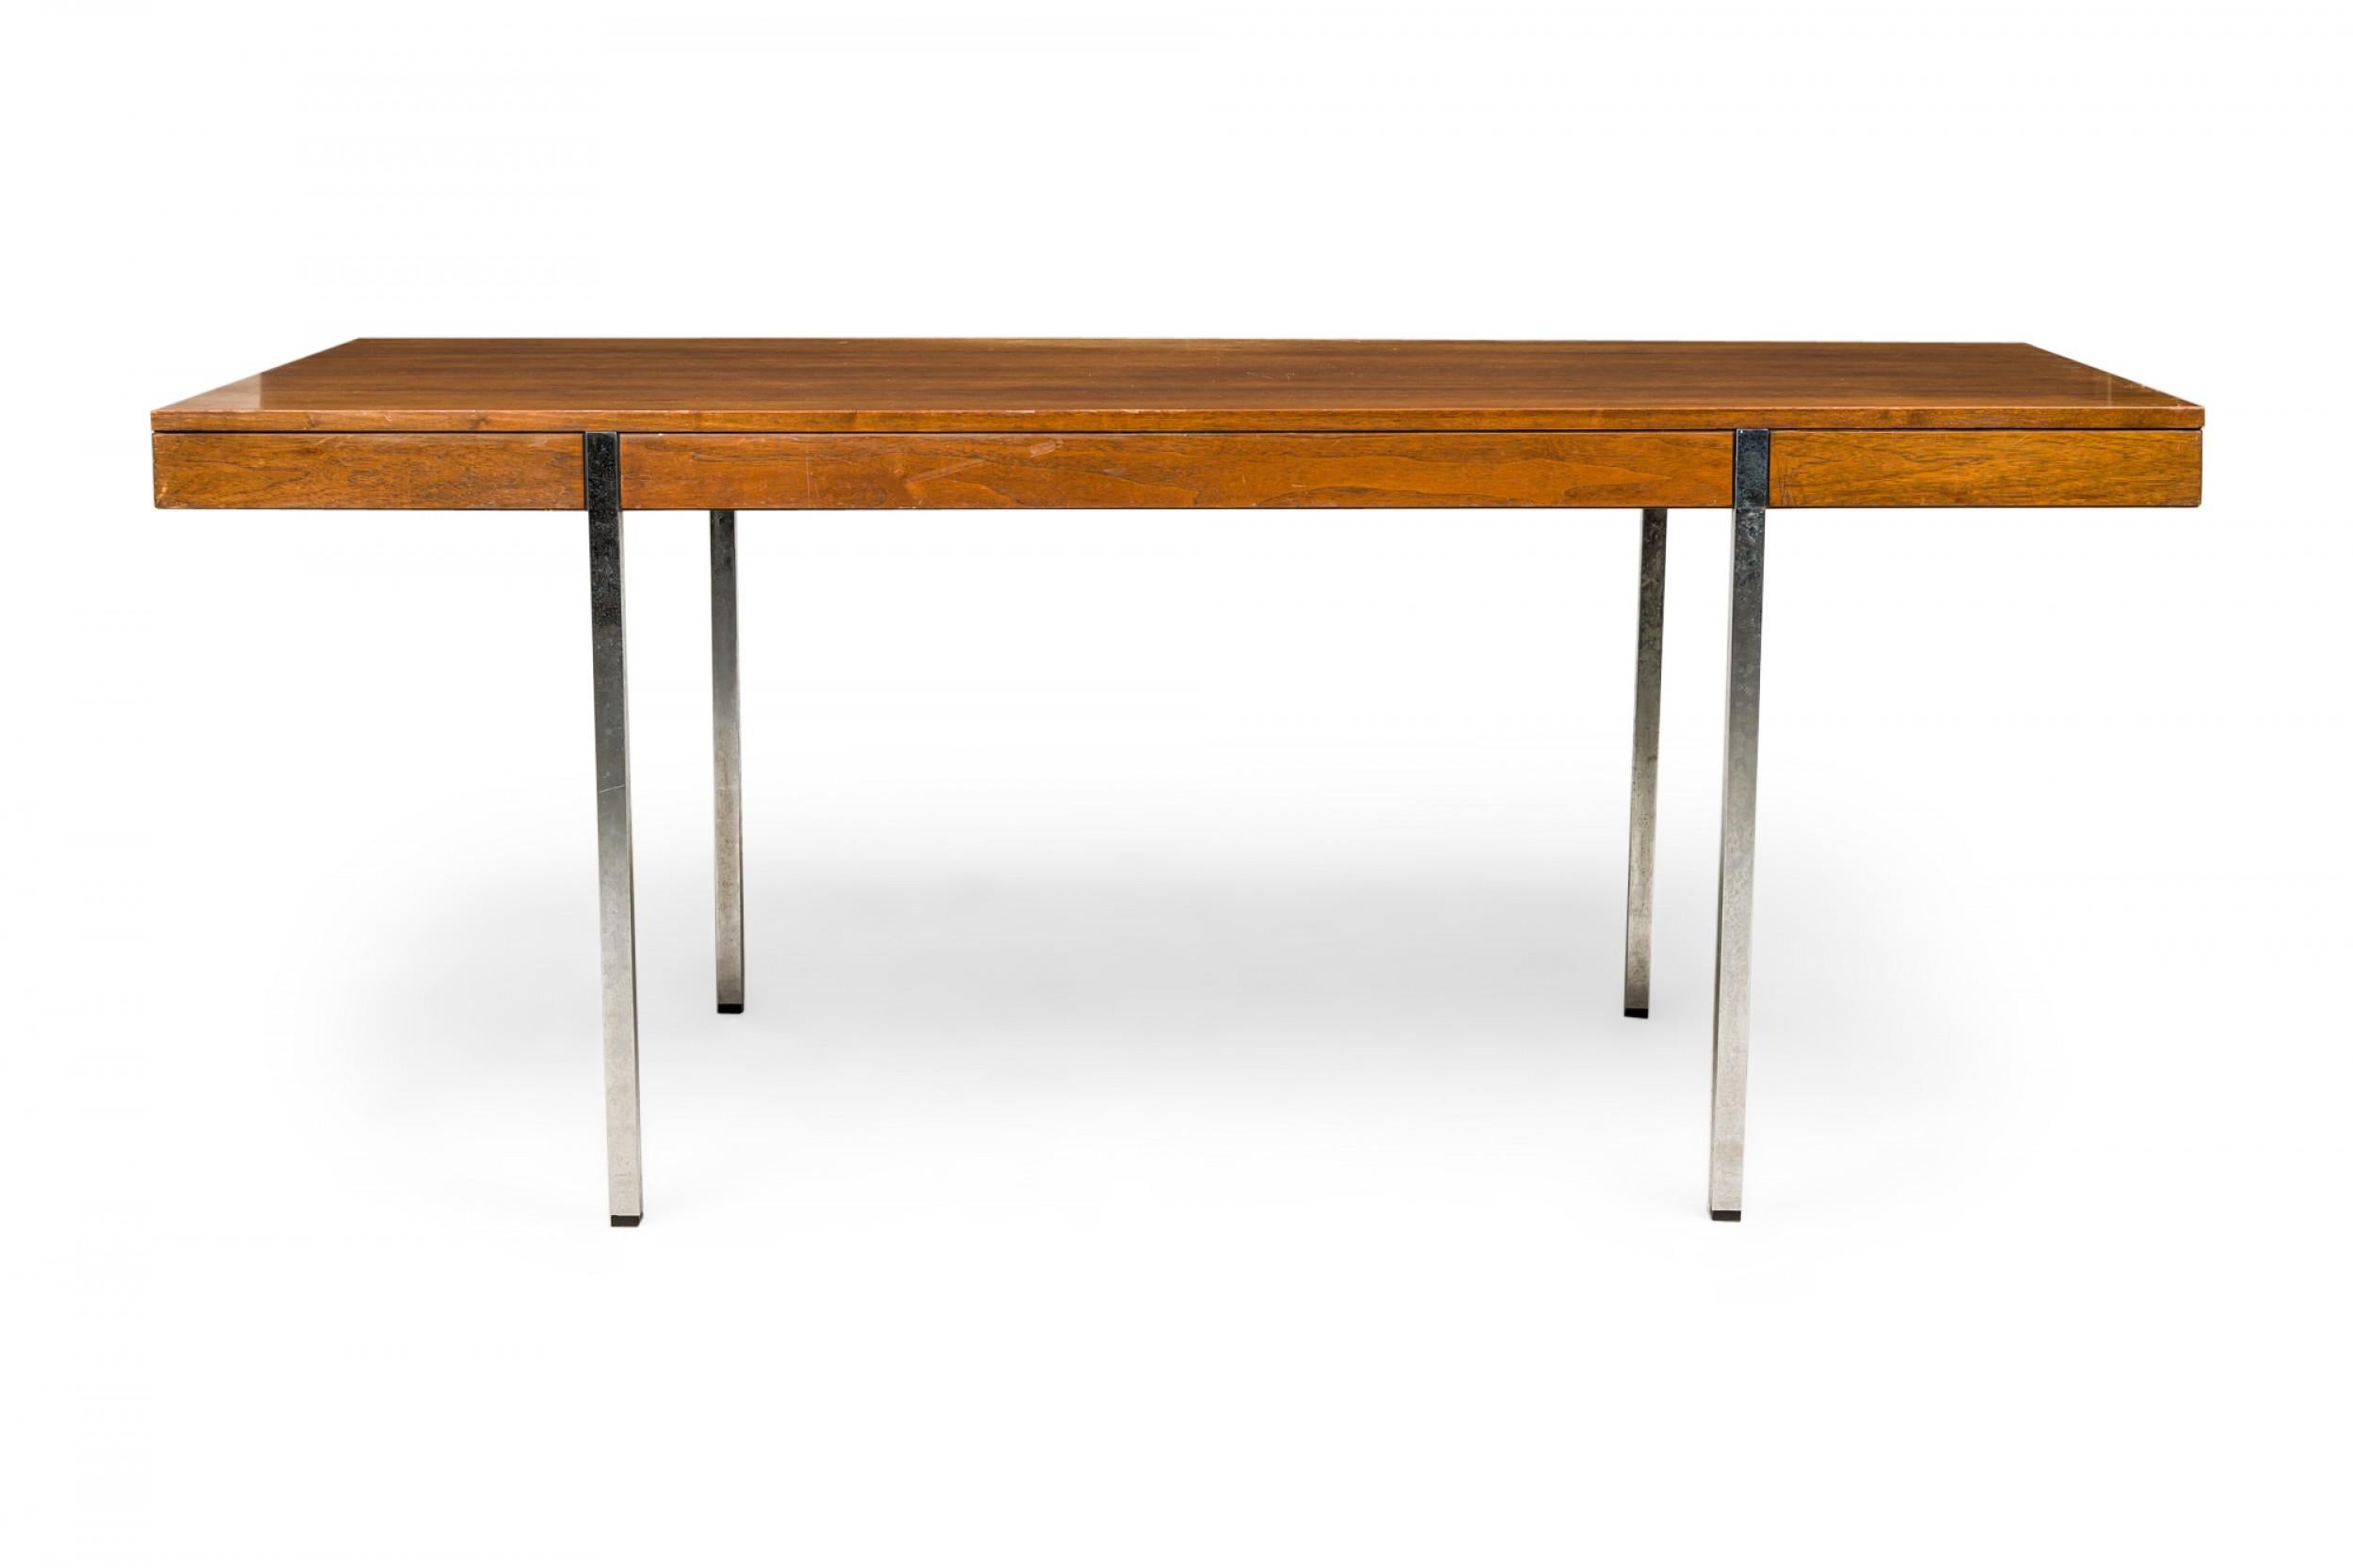 Roger Sprunger for Dunbar Furniture Co. Minimalist Walnut and Chrome Desk In Good Condition For Sale In New York, NY